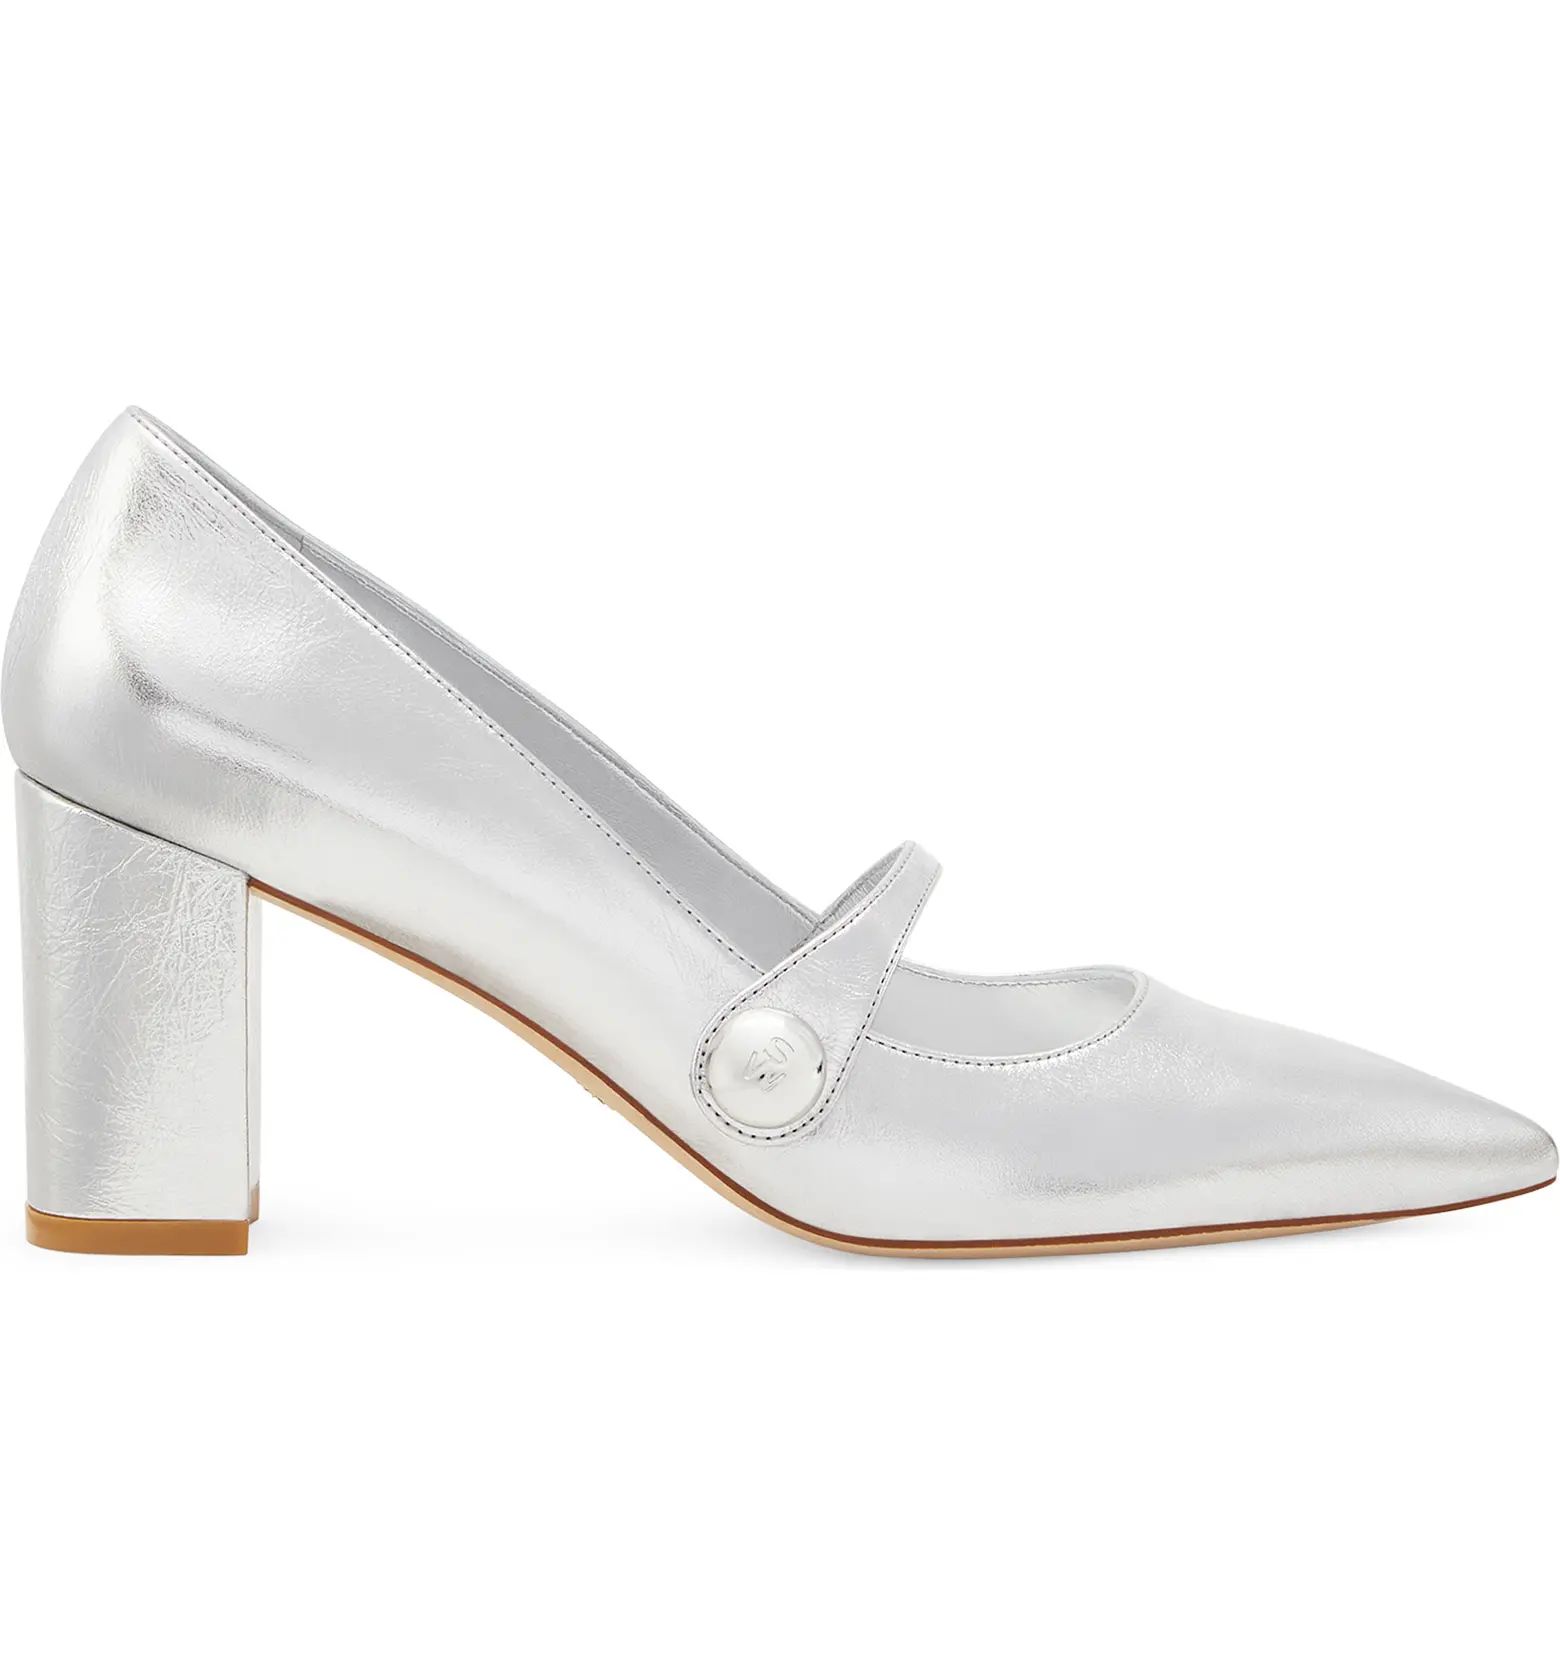 SW 75 Pointed Toe Mary Jane Pump (Women) | Nordstrom